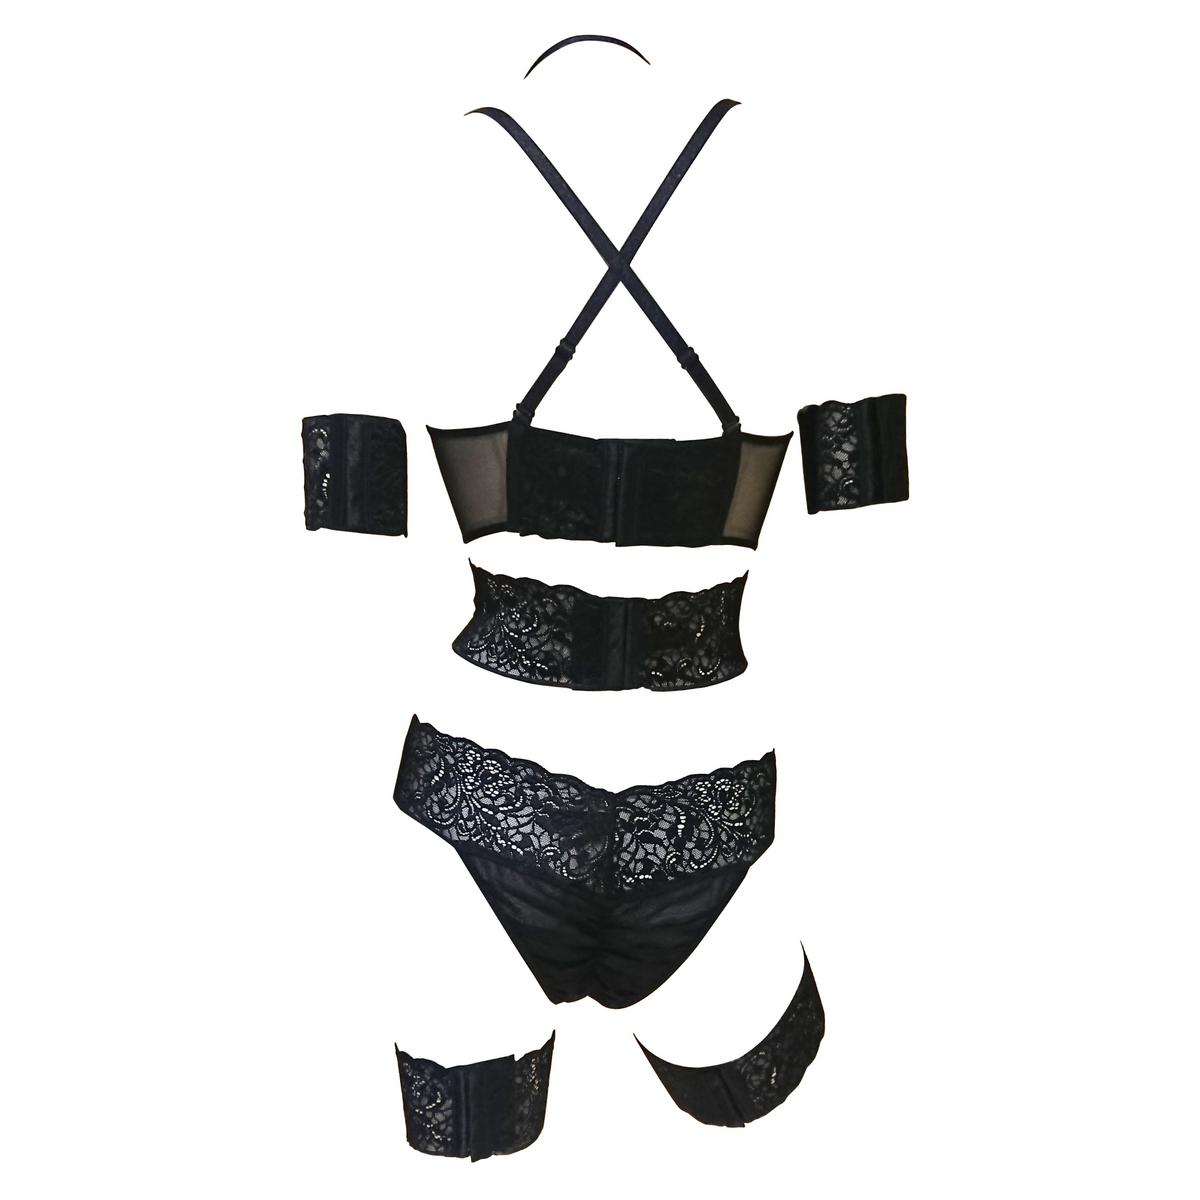 Longline Suspender Girdle in Black with Lace Front